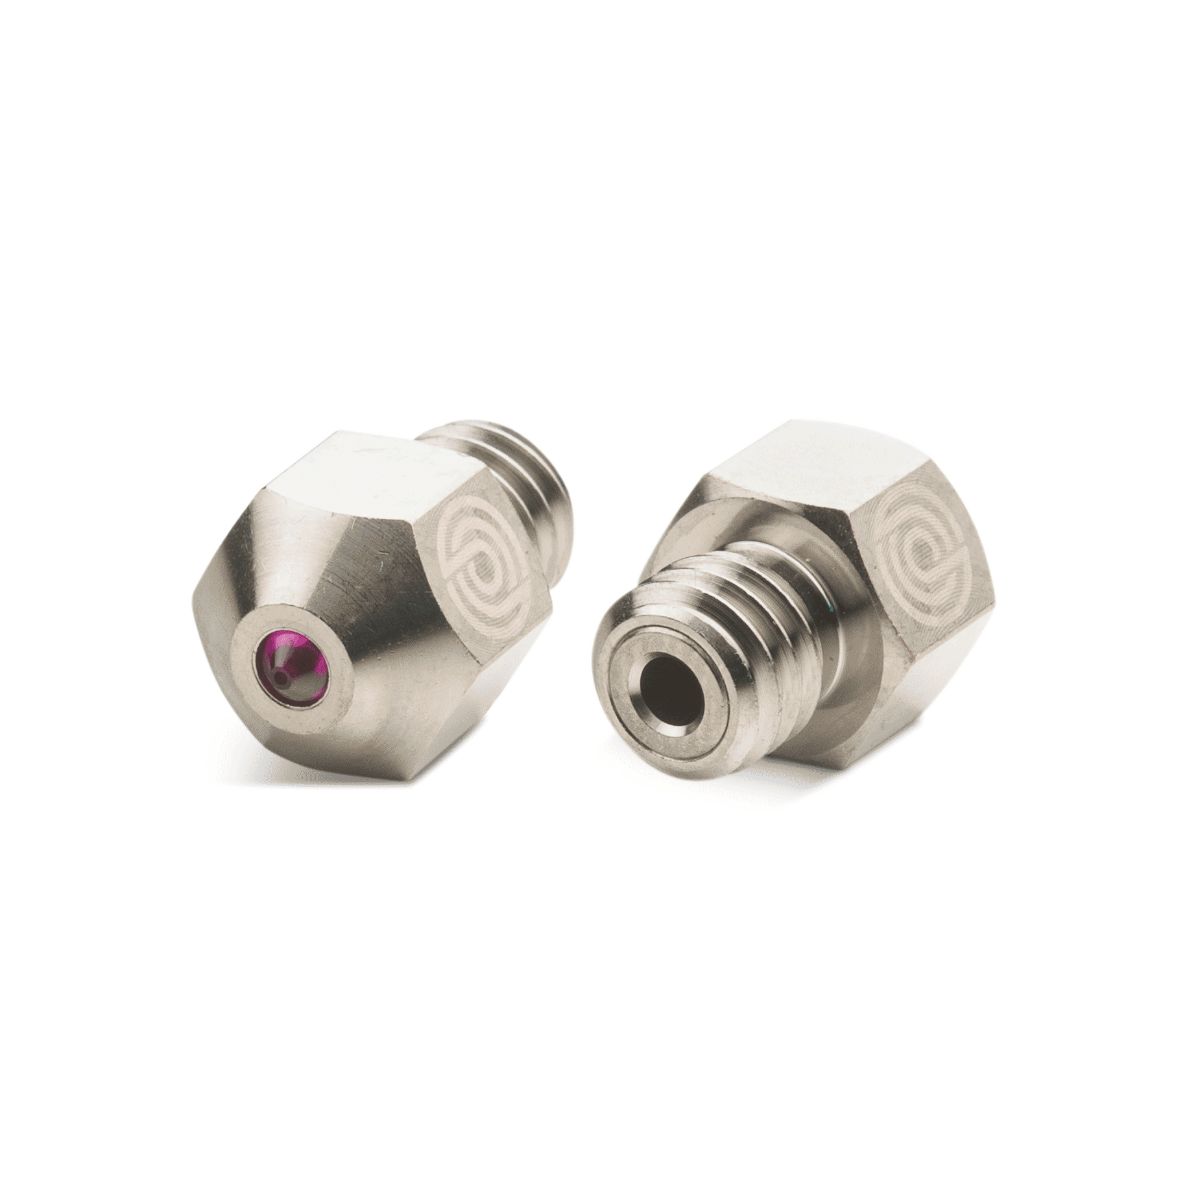 PrimaCreator MK8 Nickel Plated Copper Nozzle with Ruby 0.4mm - 1pcs